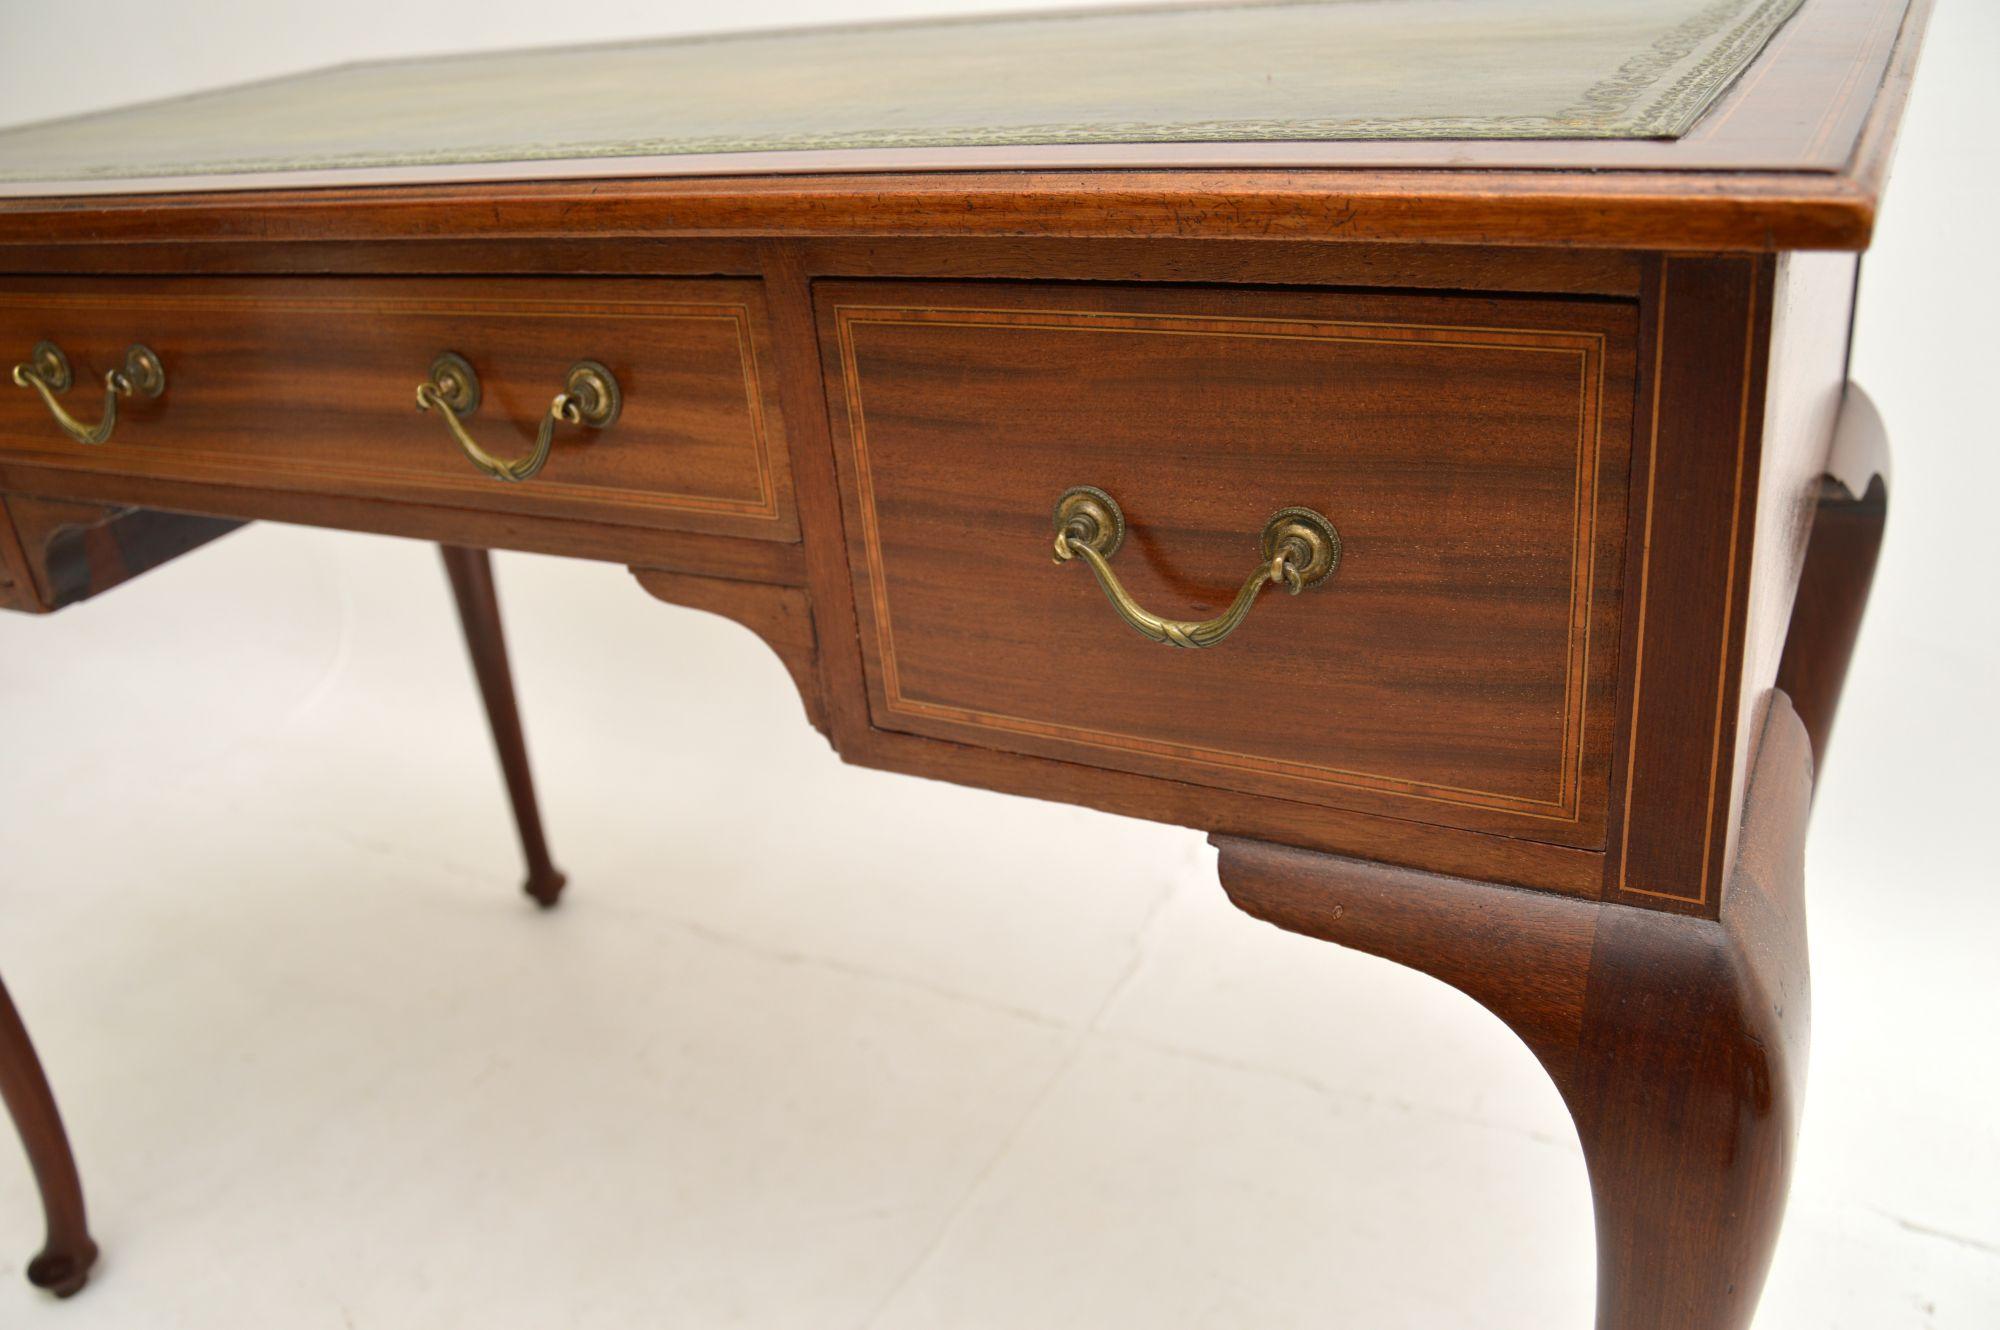 Antique Edwardian Inlaid Desk by Maple & Co For Sale 4